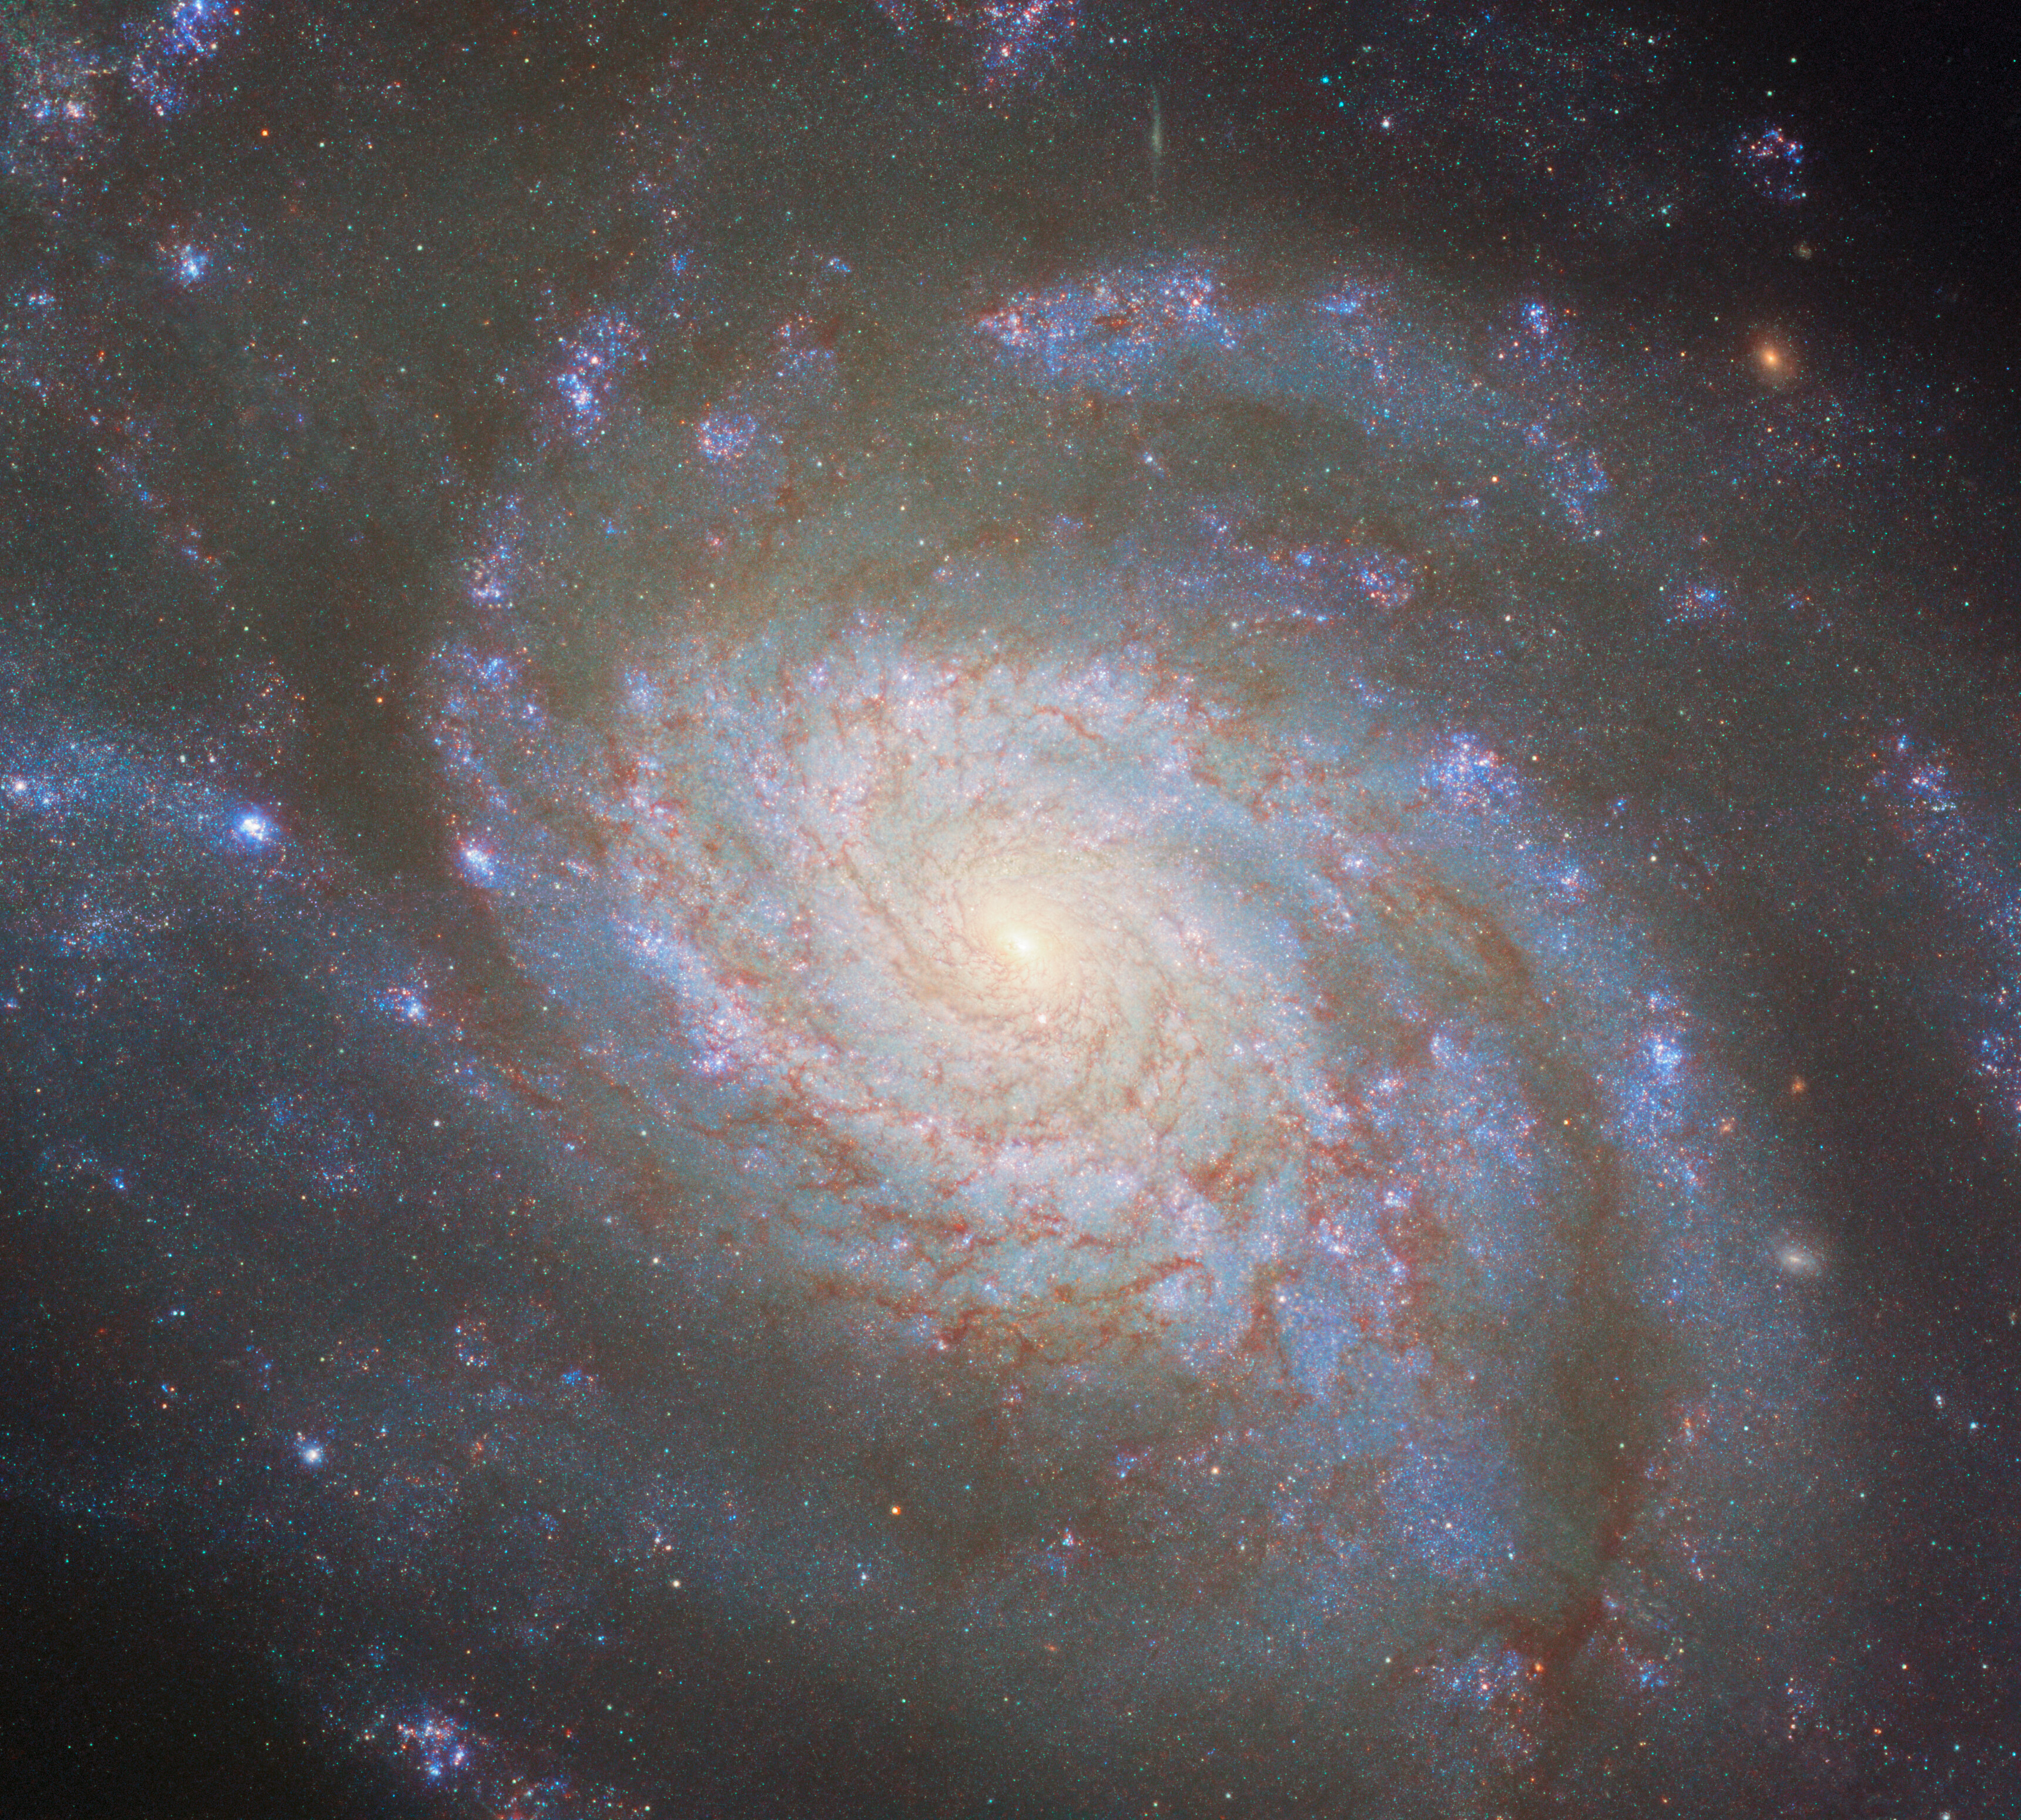 A spiral galaxy seen almost face-on. Large spiral arms whirl out from its center, filling the scene. They glow faintly blue from the stars within, with some small bright patches of blue and pink marking areas of star formation. Thin filaments of dark reddish dust that block light overlay the stars. The galaxy’s center shines brightly white.